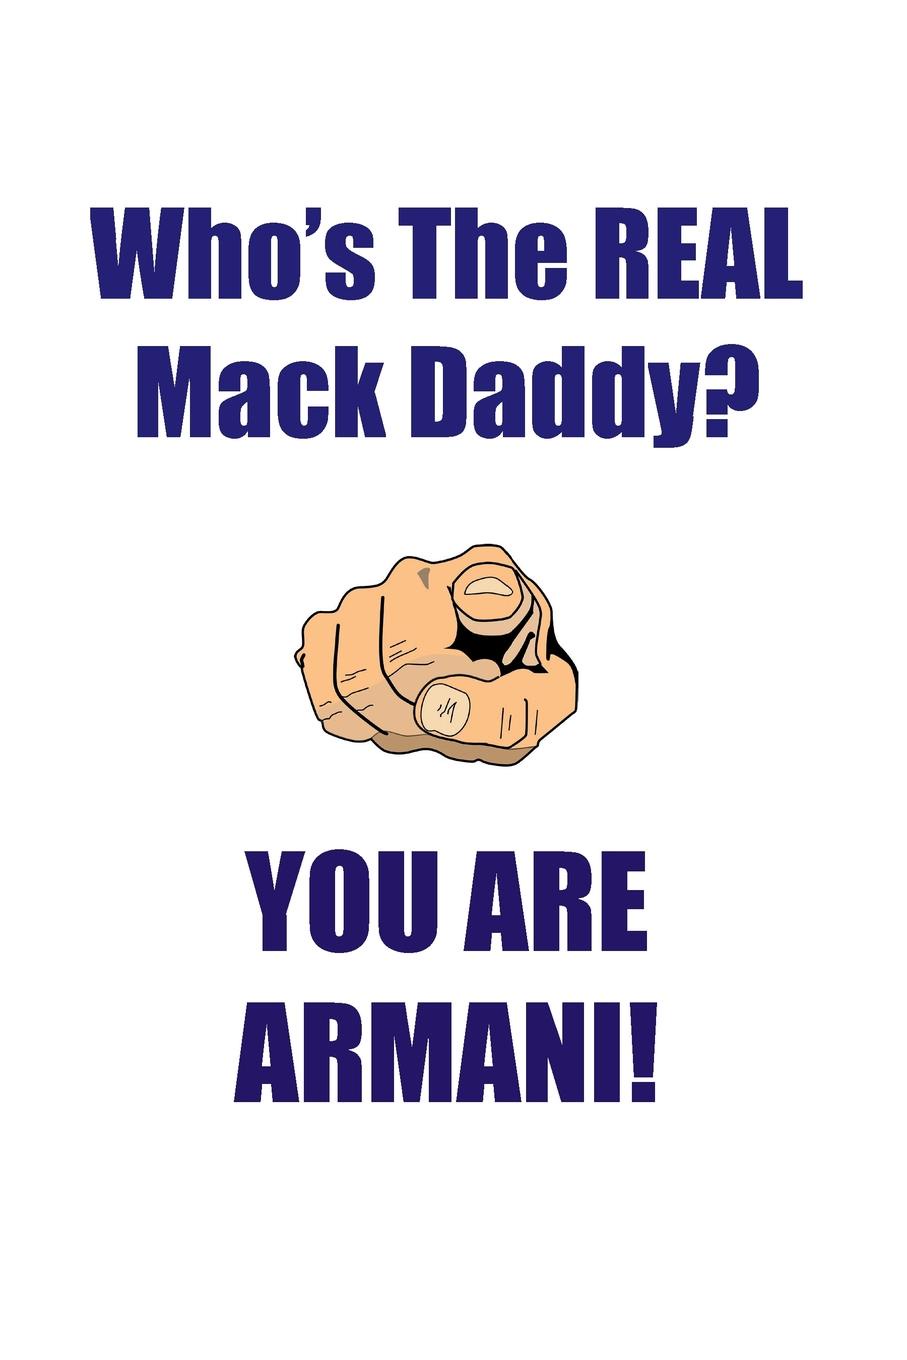 ARMANI IS THE REAL MACK DADDY AFFIRMATIONS WORKBOOK Positive Affirmations Workbook Includes. Mentoring Questions, Guidance, Supporting You